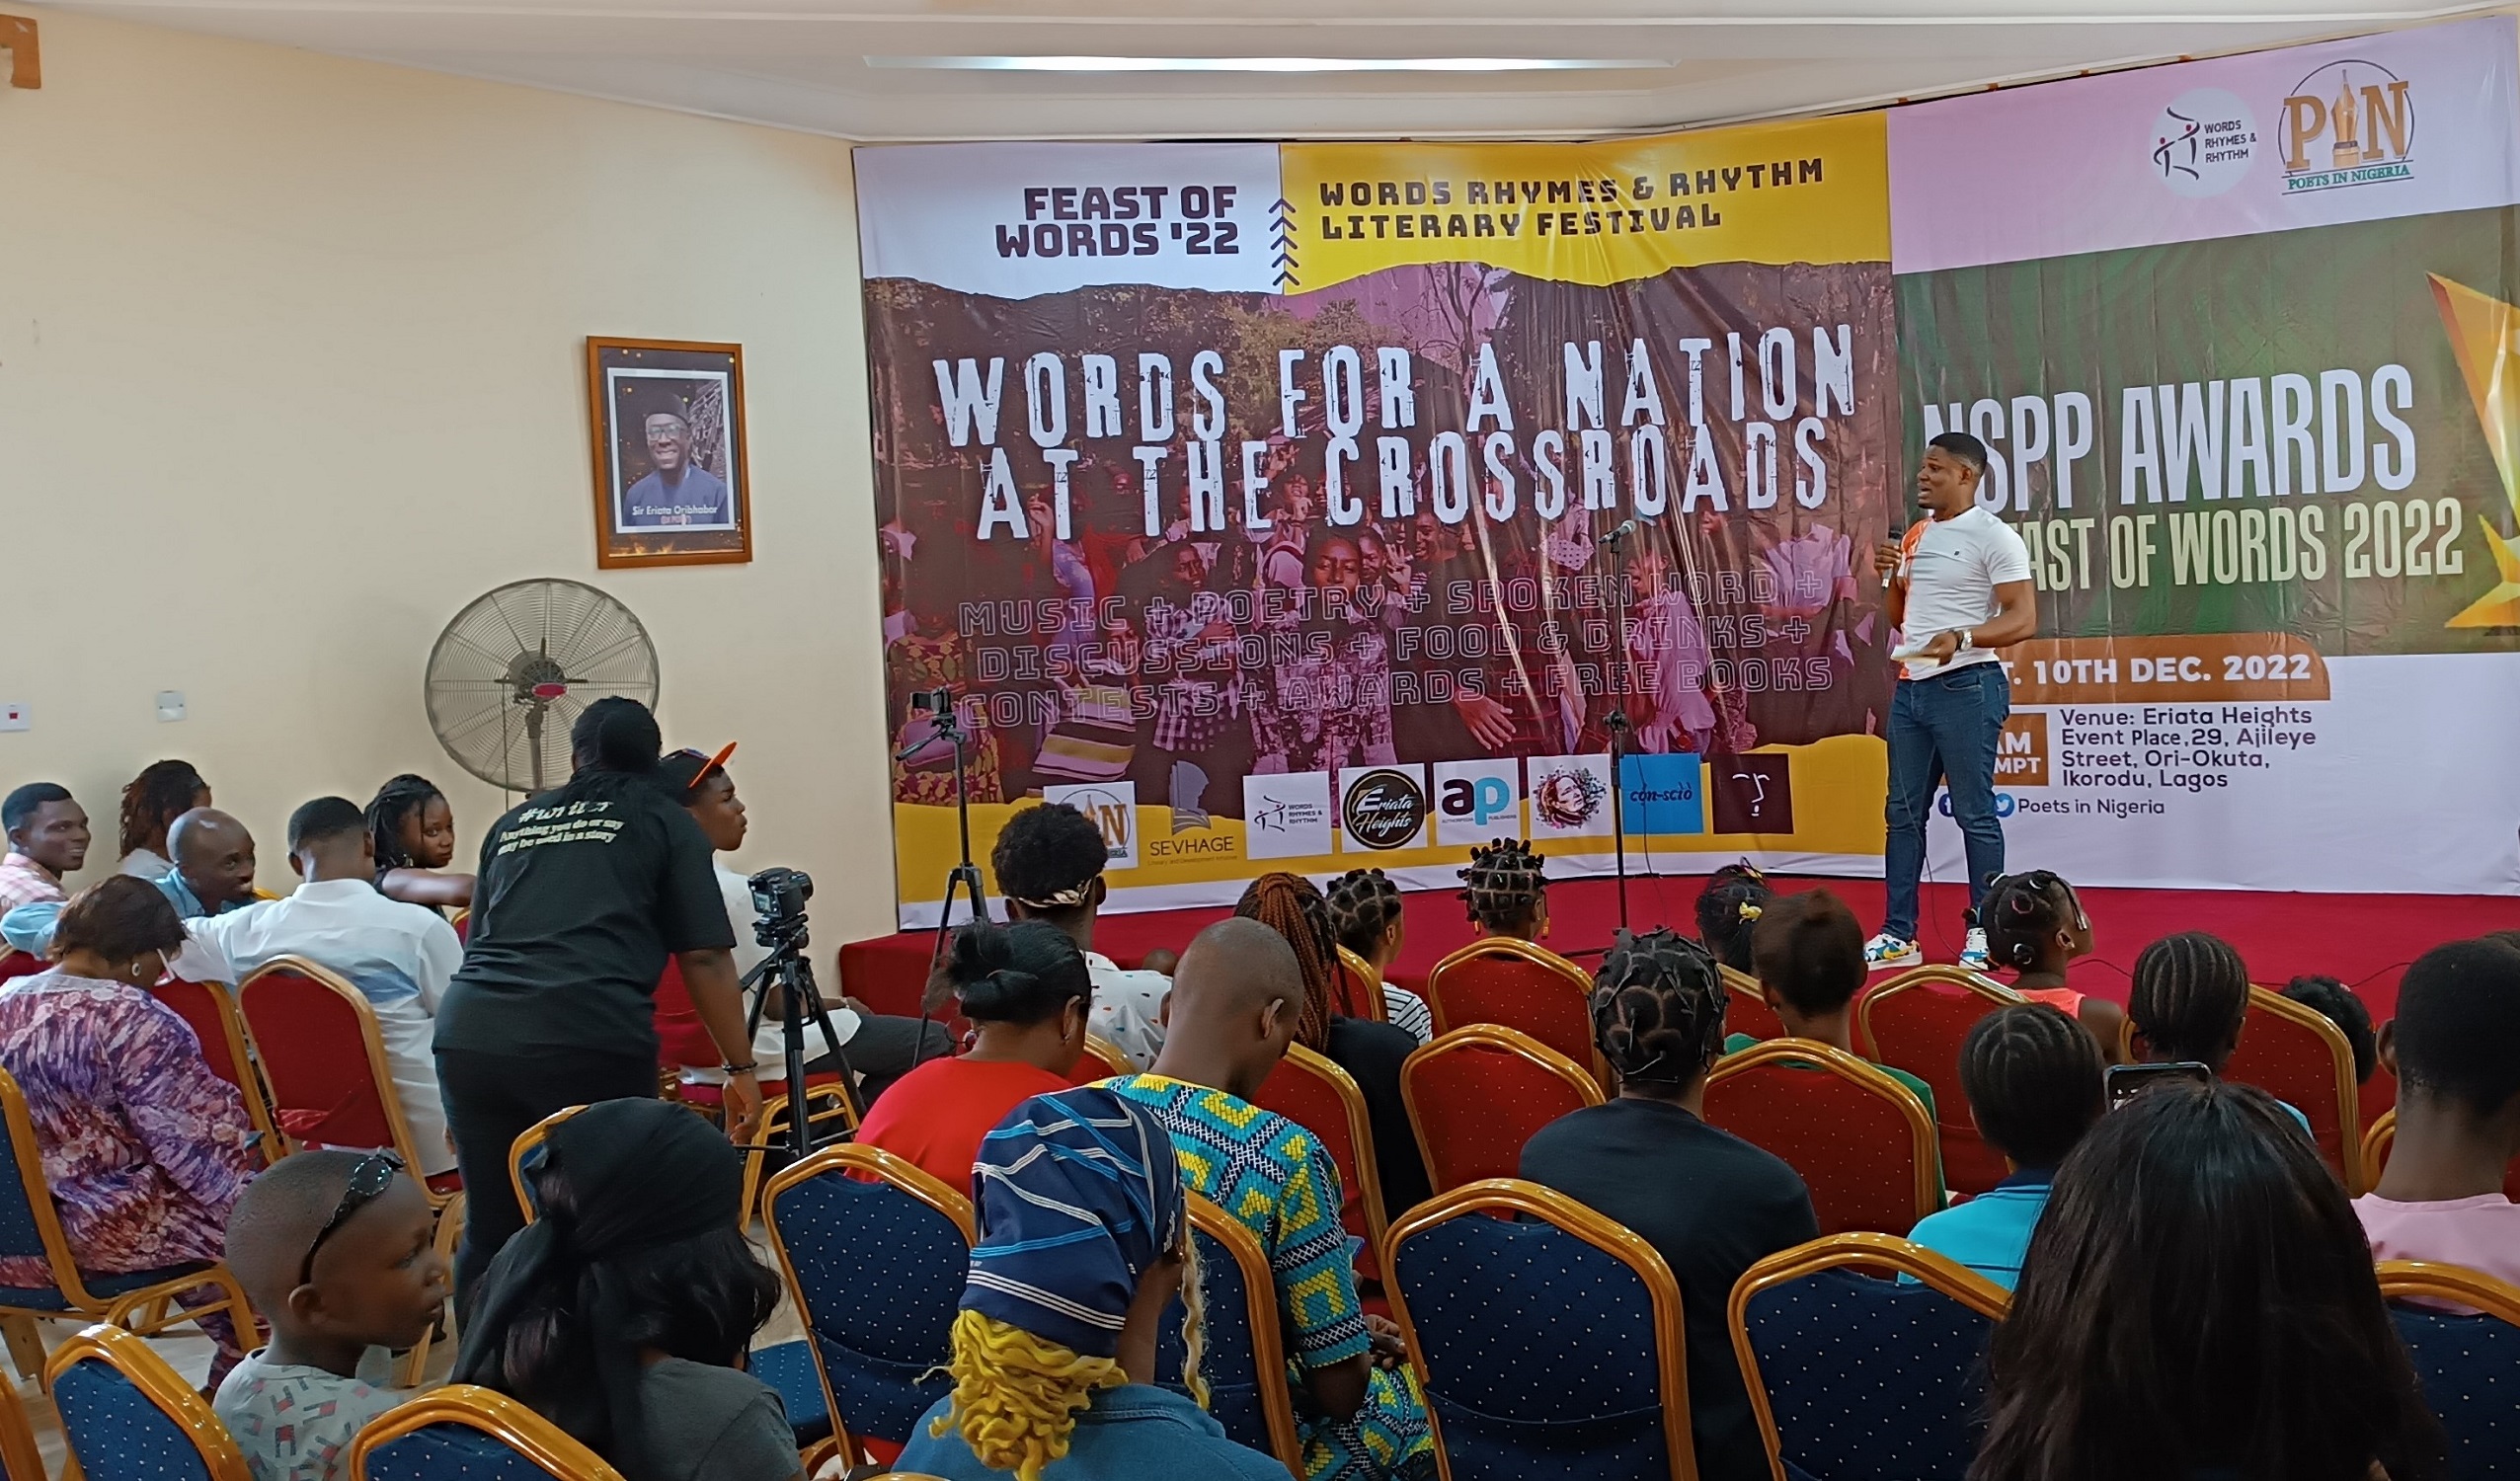 ARTS, CREATIVITY & FRIENDSHIP: WORDS RHYMES & RHYTHM LEAVES ANOTHER MARK ON THE NIGERIAN LITERARY SCENE WITH FEAST OF WORDS 2022